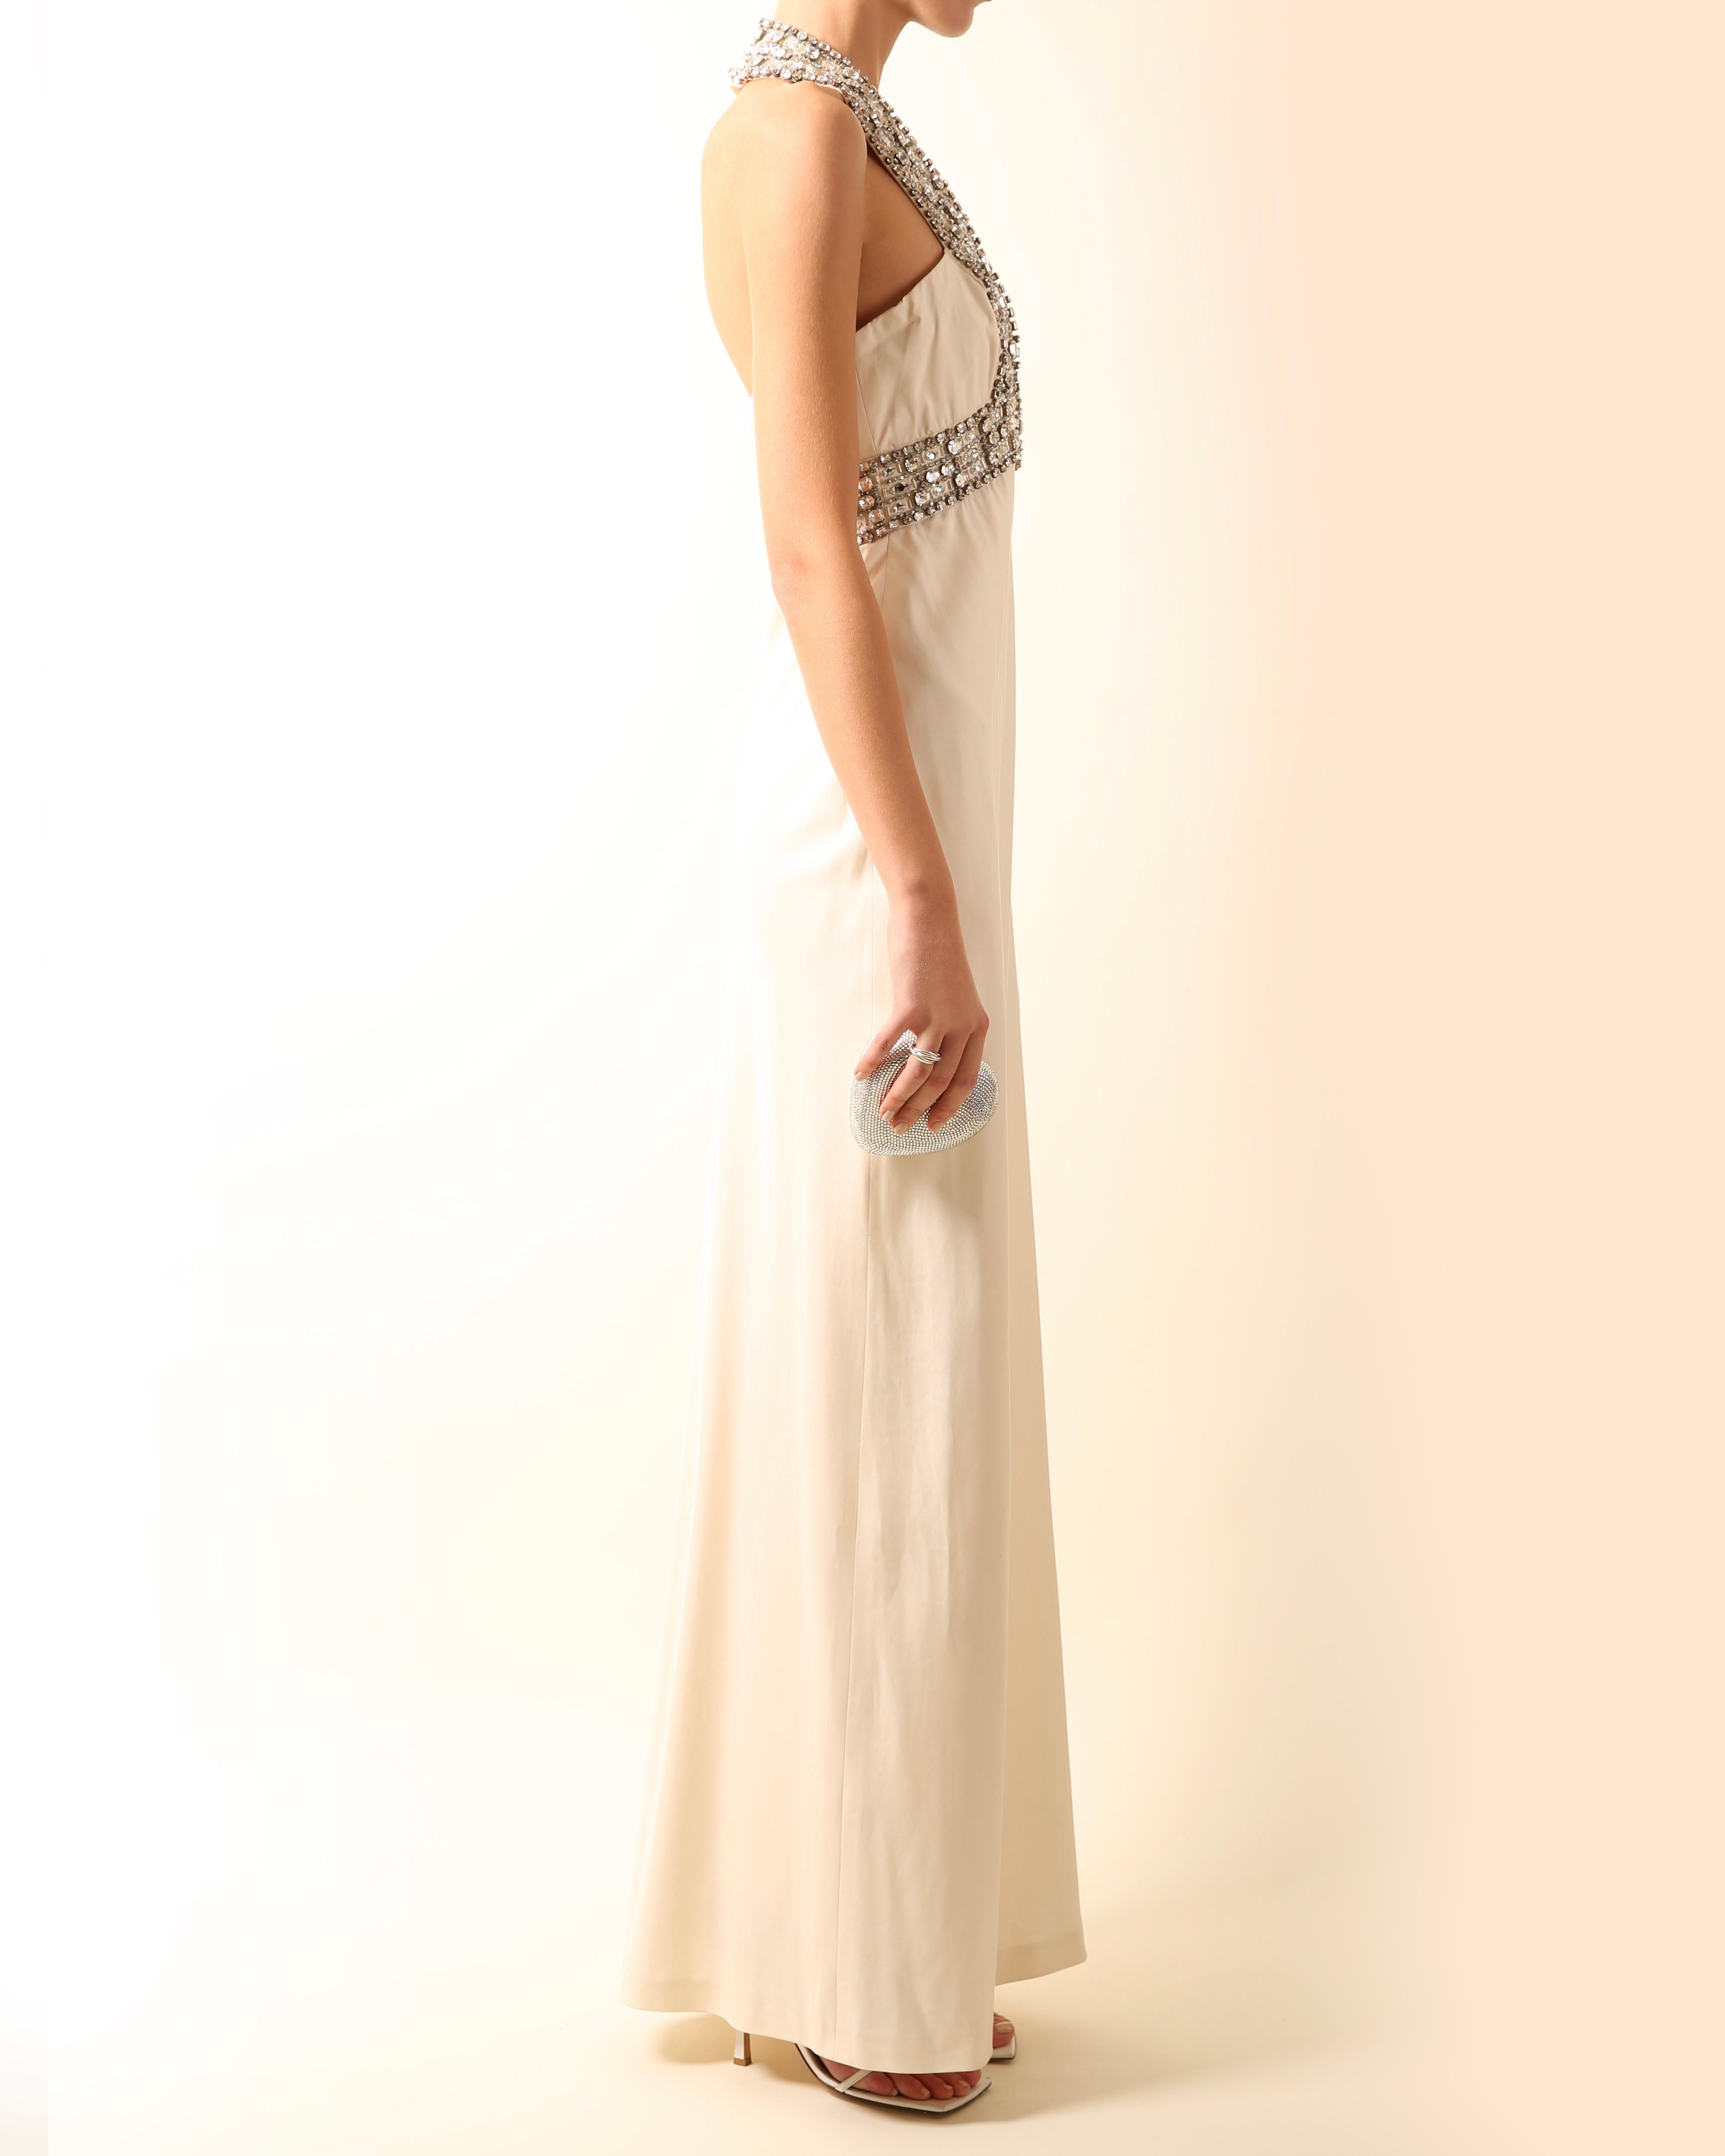 Azzaro white ivory crystal embellished low cut out halter neck dress gown 36 4